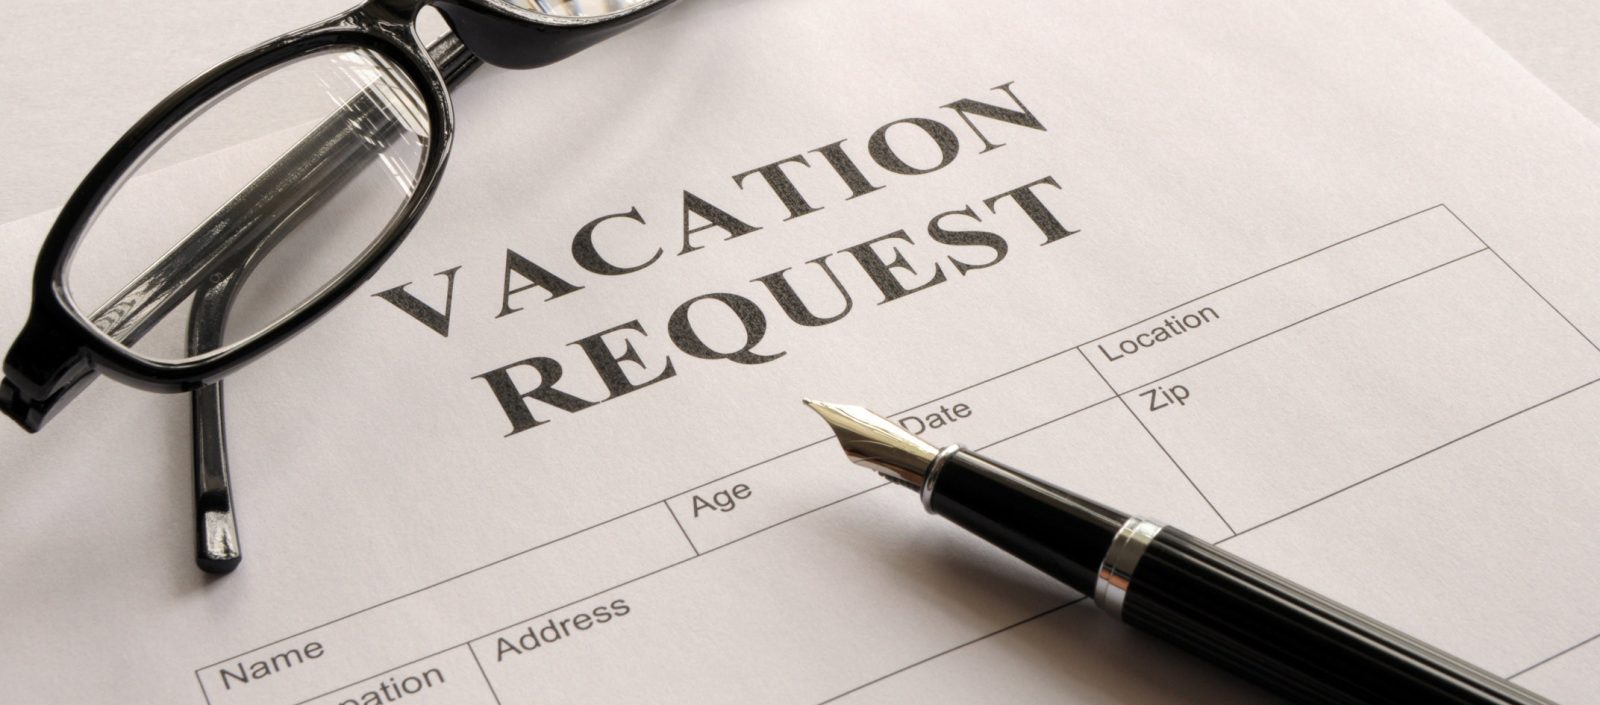 Why not give employee happiness a great big boost today by bringing out the employee vacation request forms, and plopping them down in plain sight? 